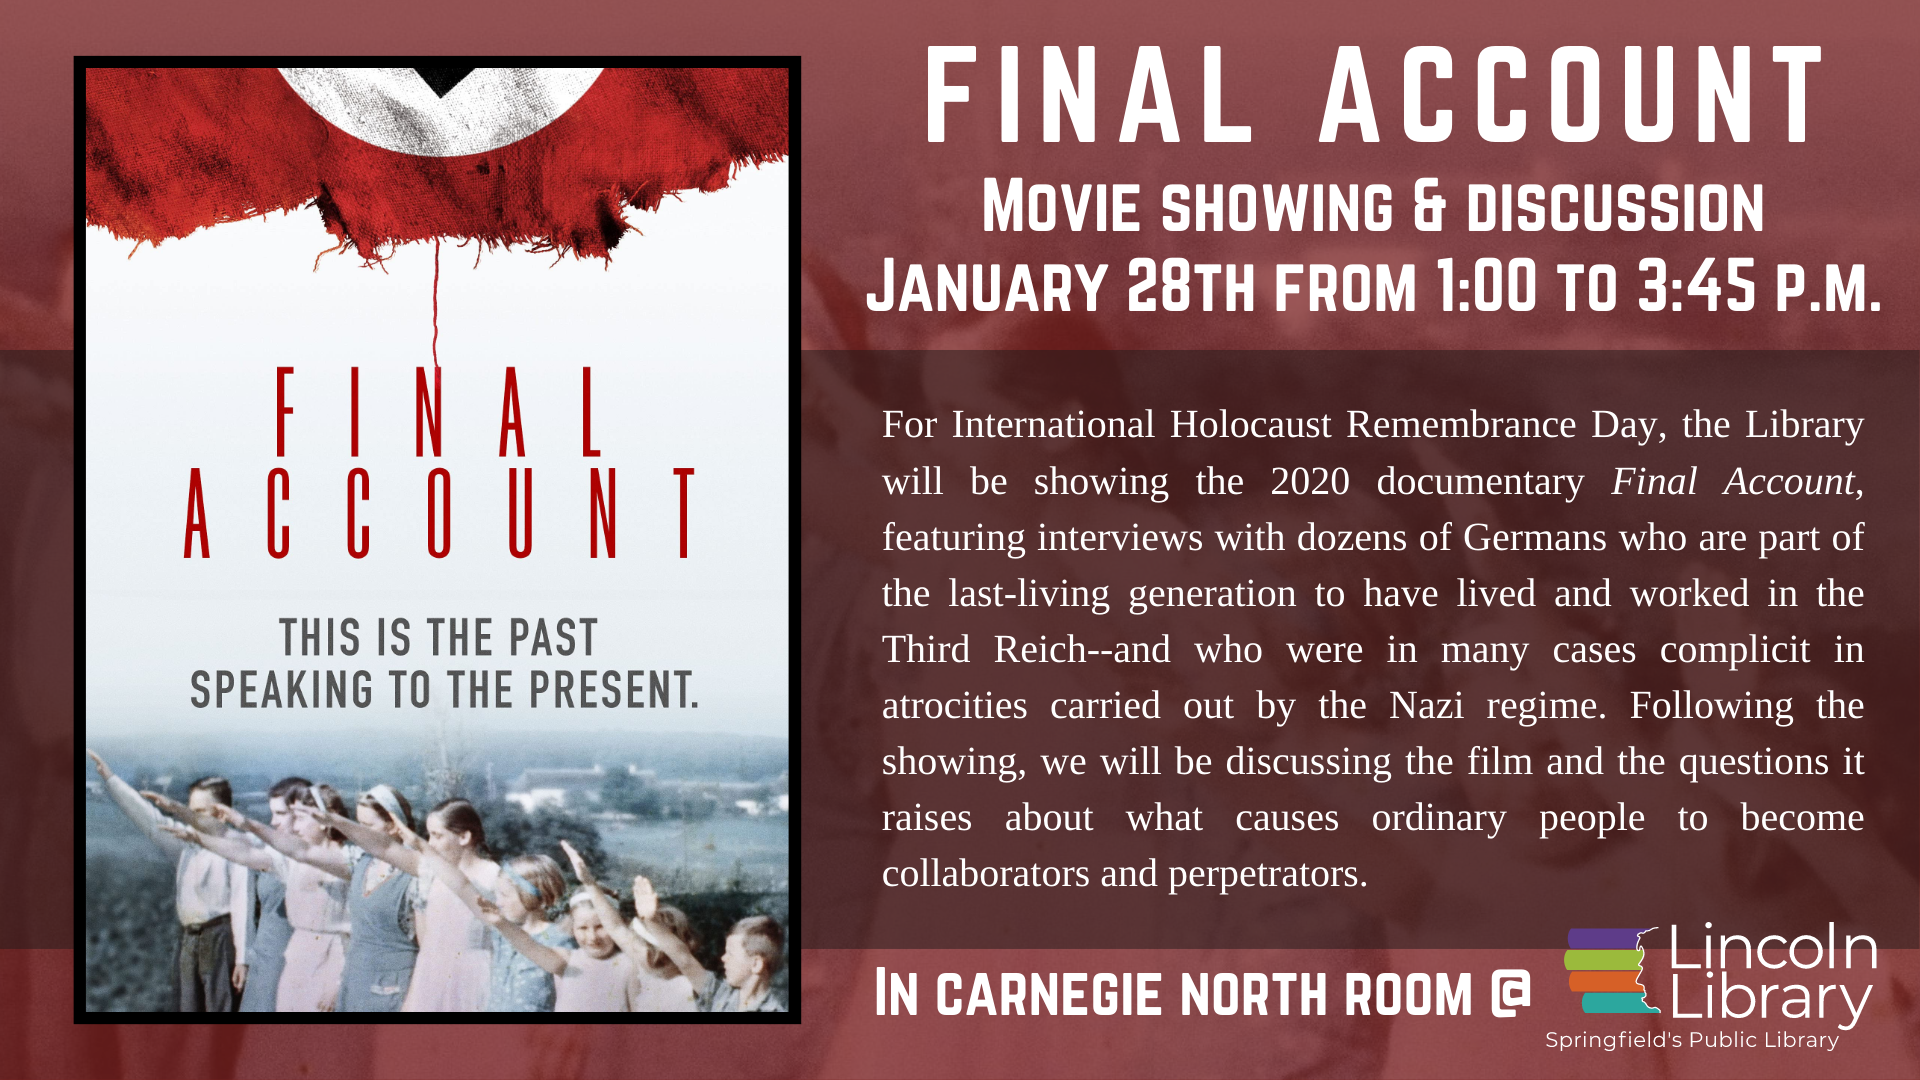 Promotional flyer for showing of the film "Final Account" for International Holocaust Rememberance Day